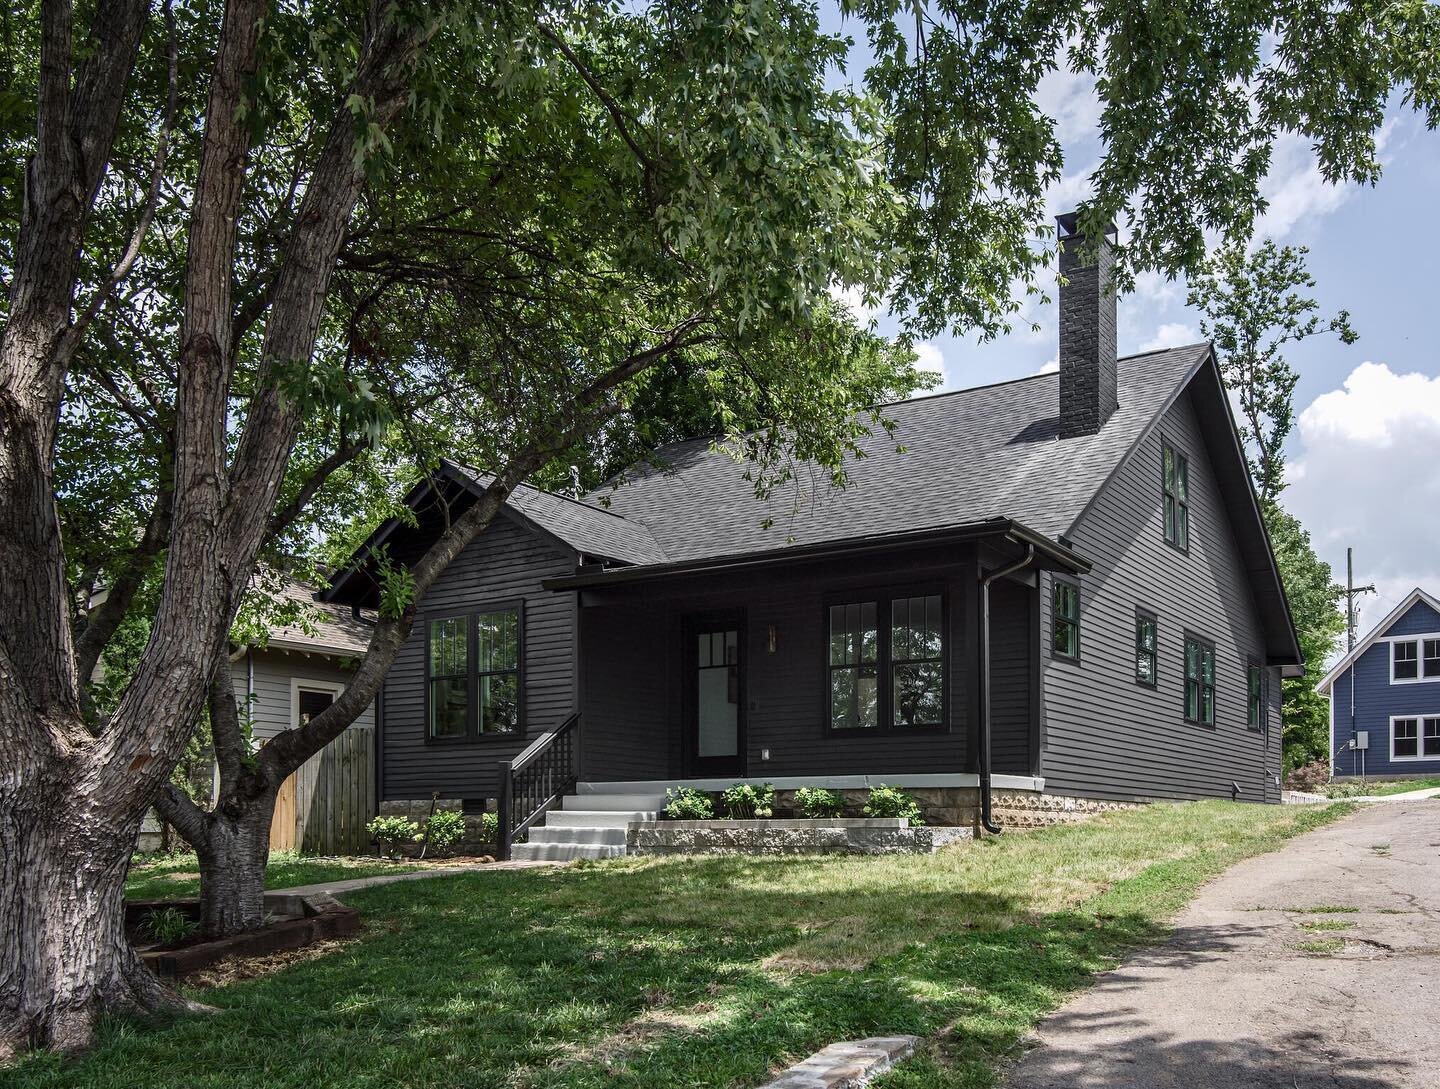 My favorite listing of the day! 
It&rsquo;s truly captivated my full attention this morning :)

Sophisticated modern design just listed in desirable and walkable Lockeland Springs 🌿🖤🌿

Completely renovated and originally built in 1935, featuring F